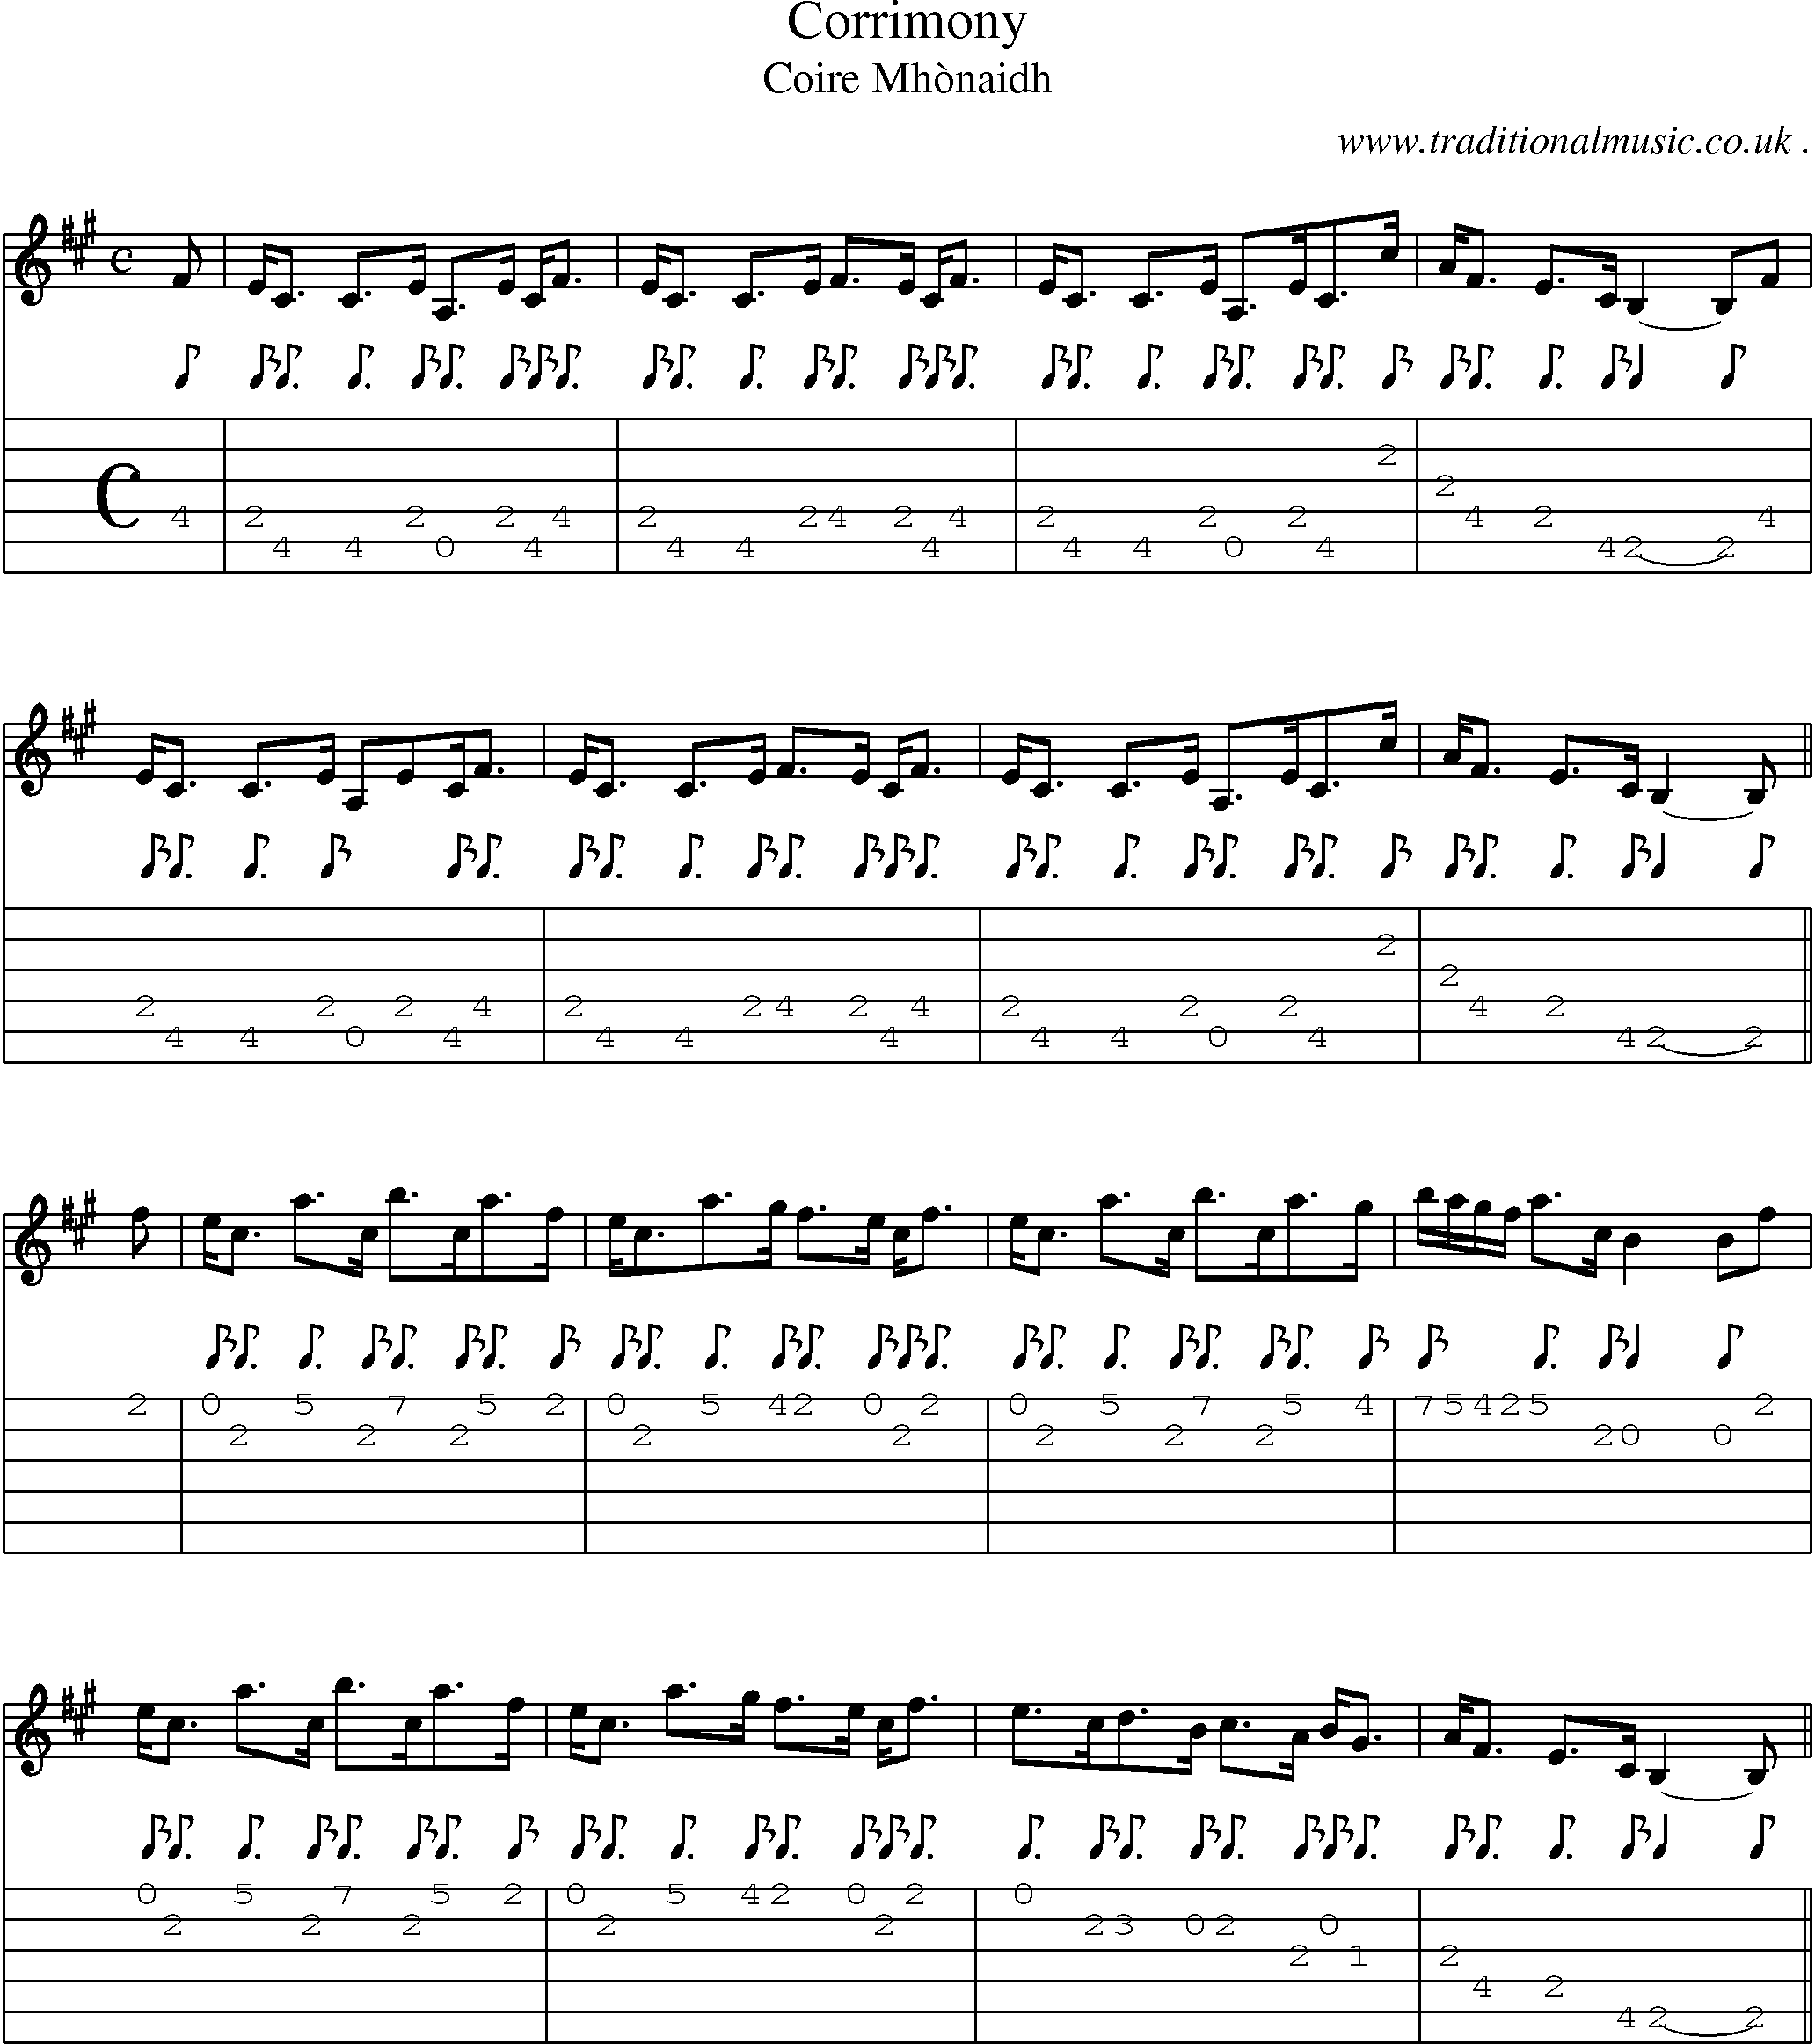 Sheet-music  score, Chords and Guitar Tabs for Corrimony